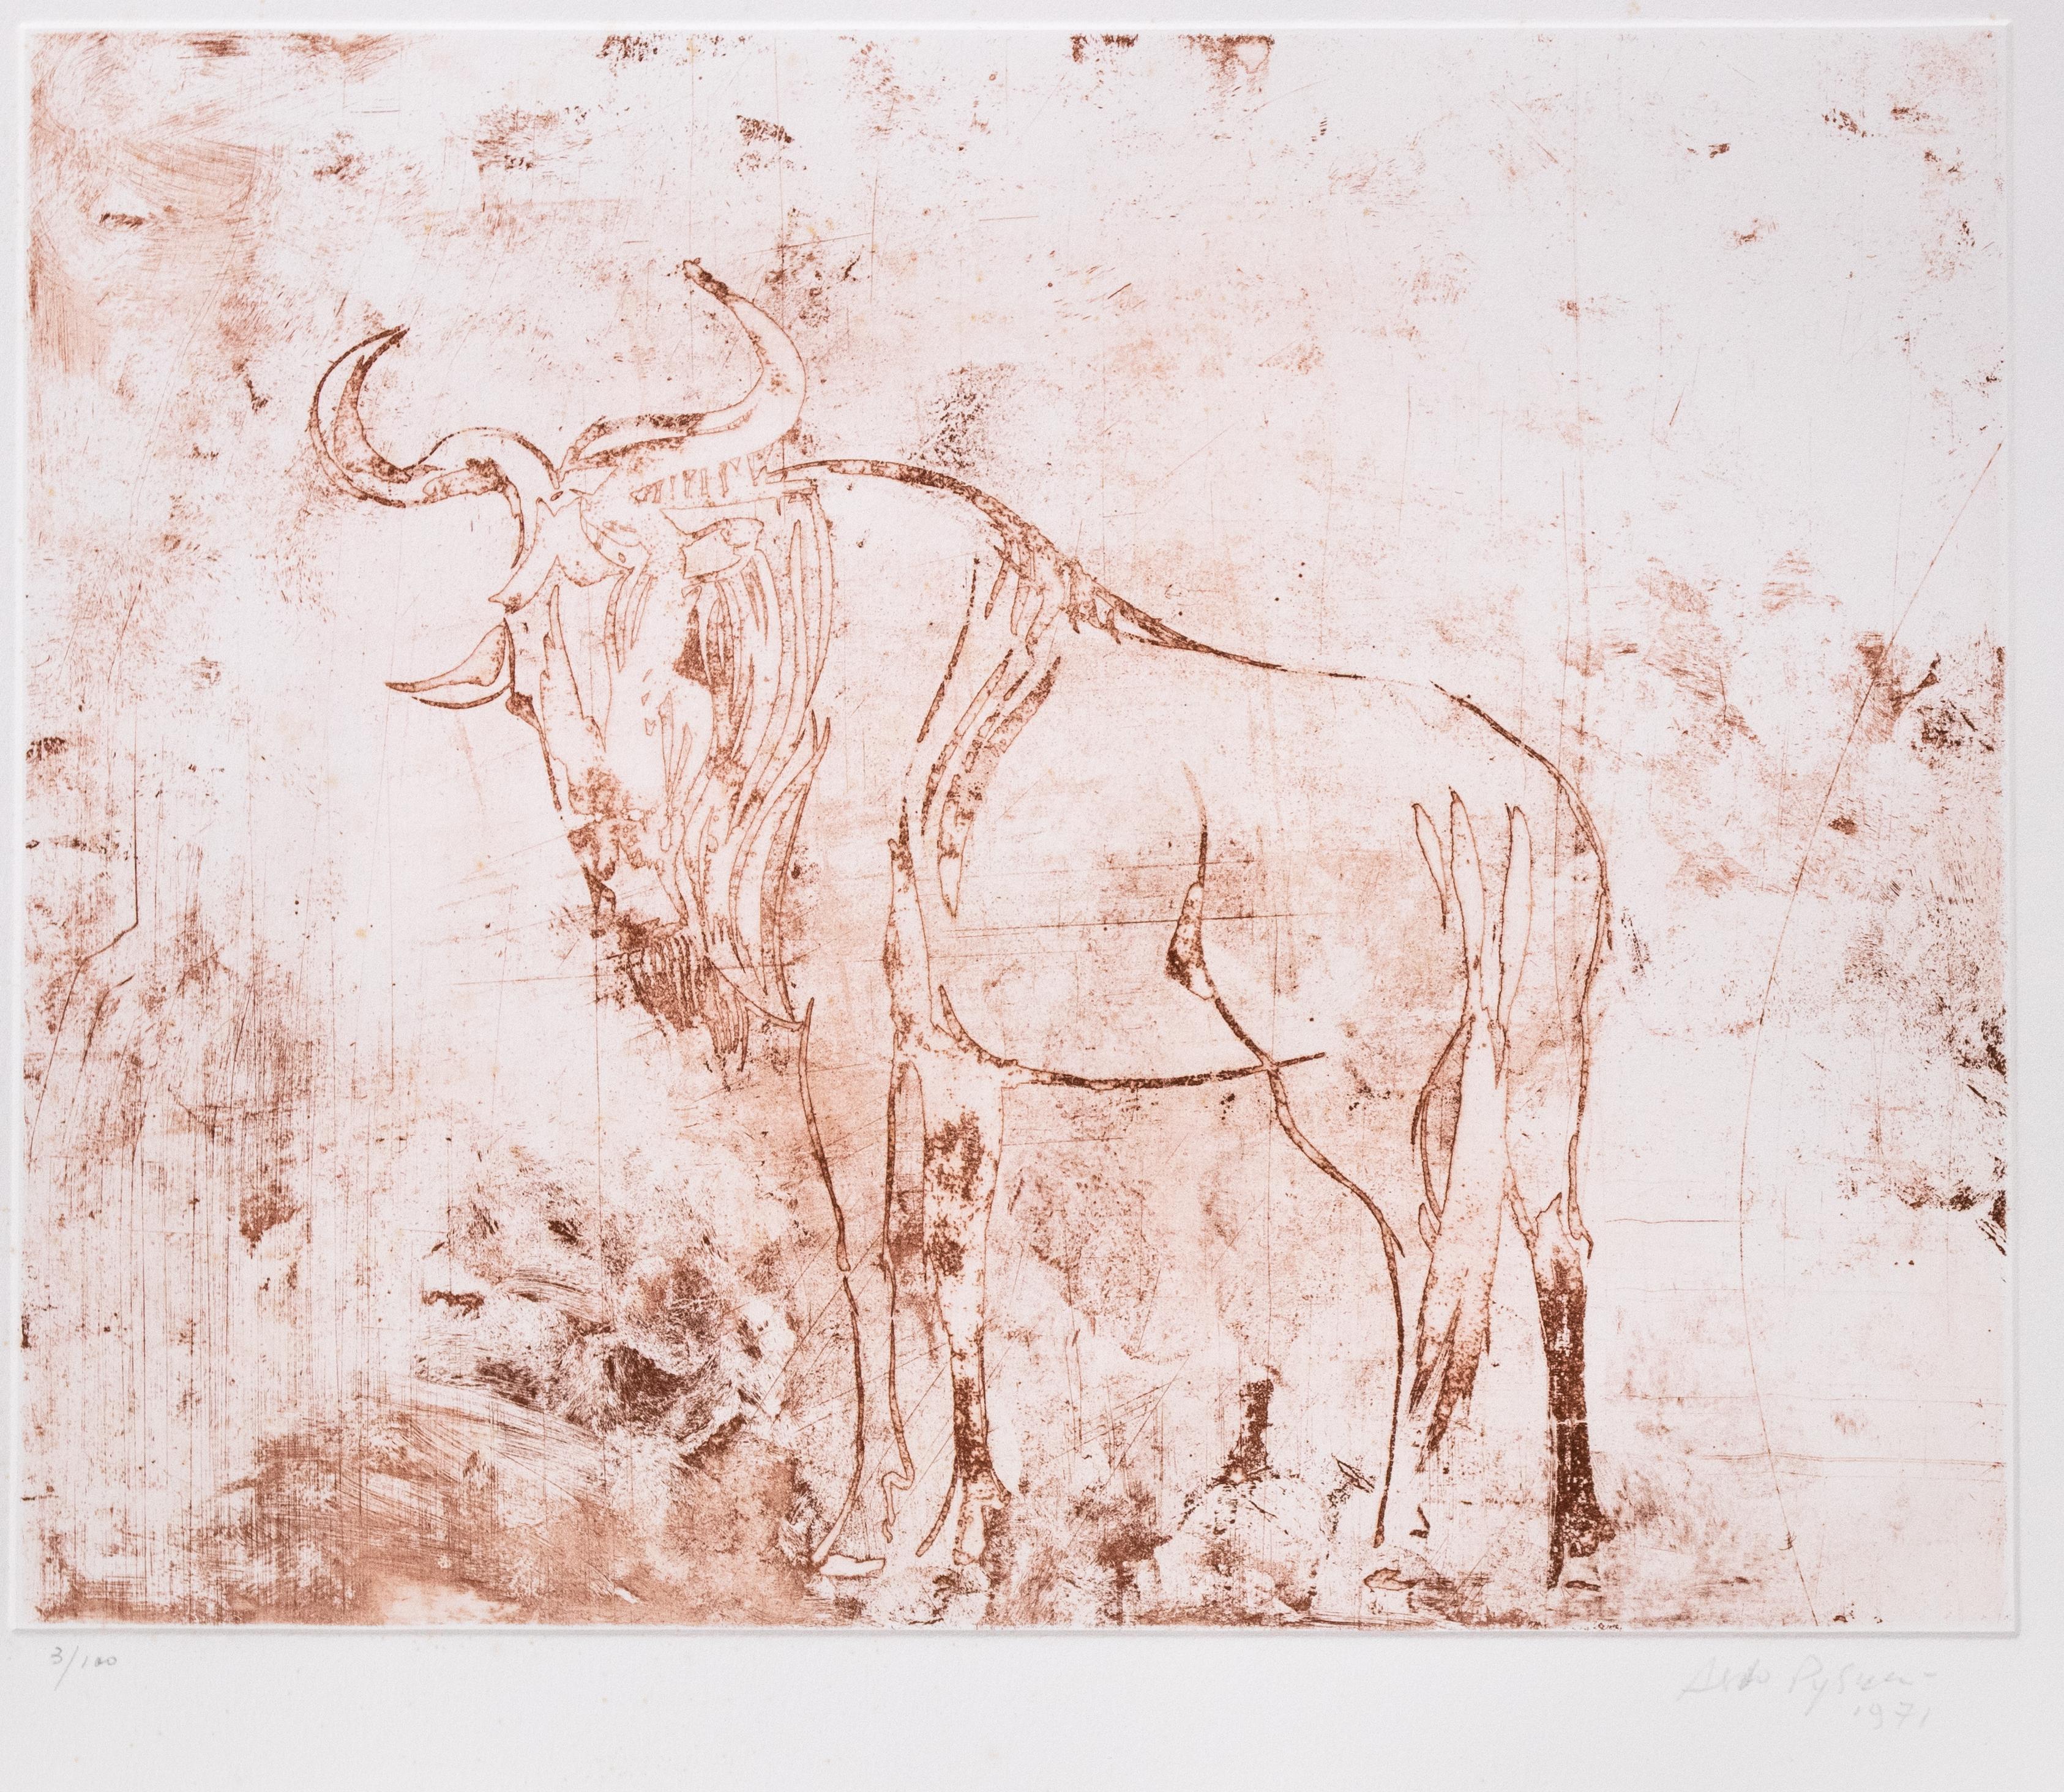 Buffalo - Original Etching on Paper by Aldo Pagliacci - 1971 For Sale 1